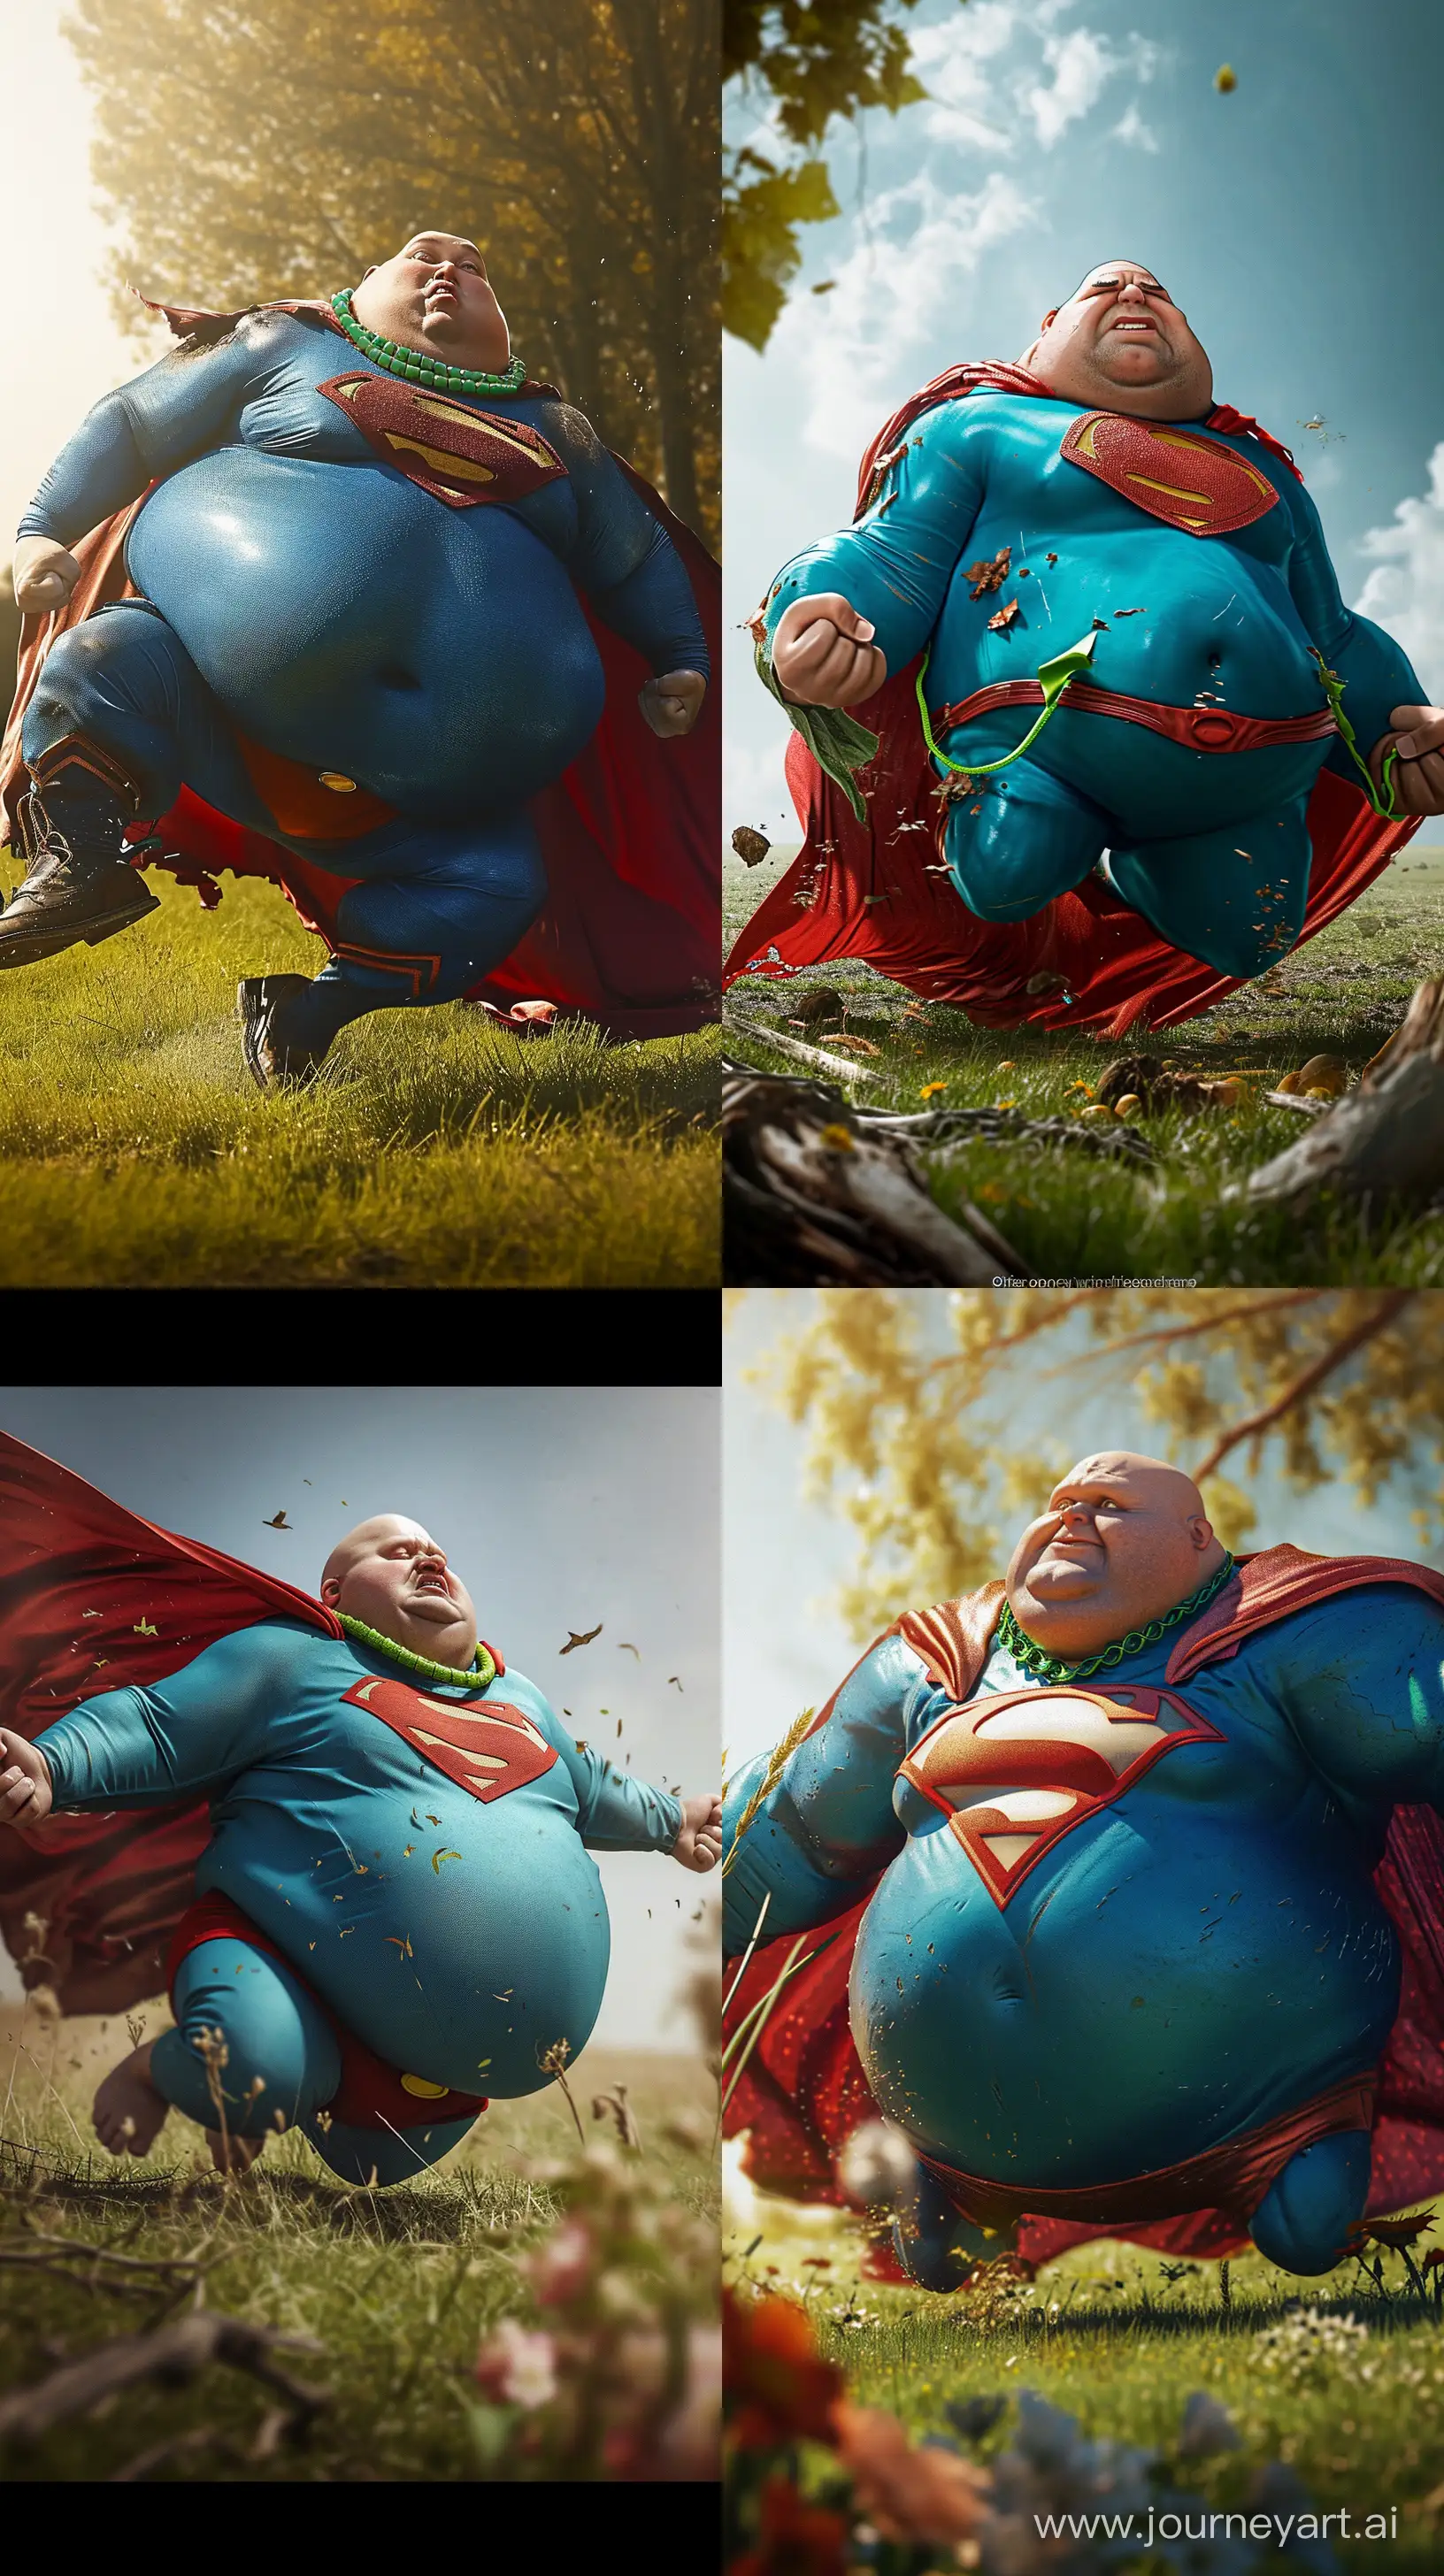 Chubby-Superman-Tumbling-in-Meadow-with-Bright-Costume